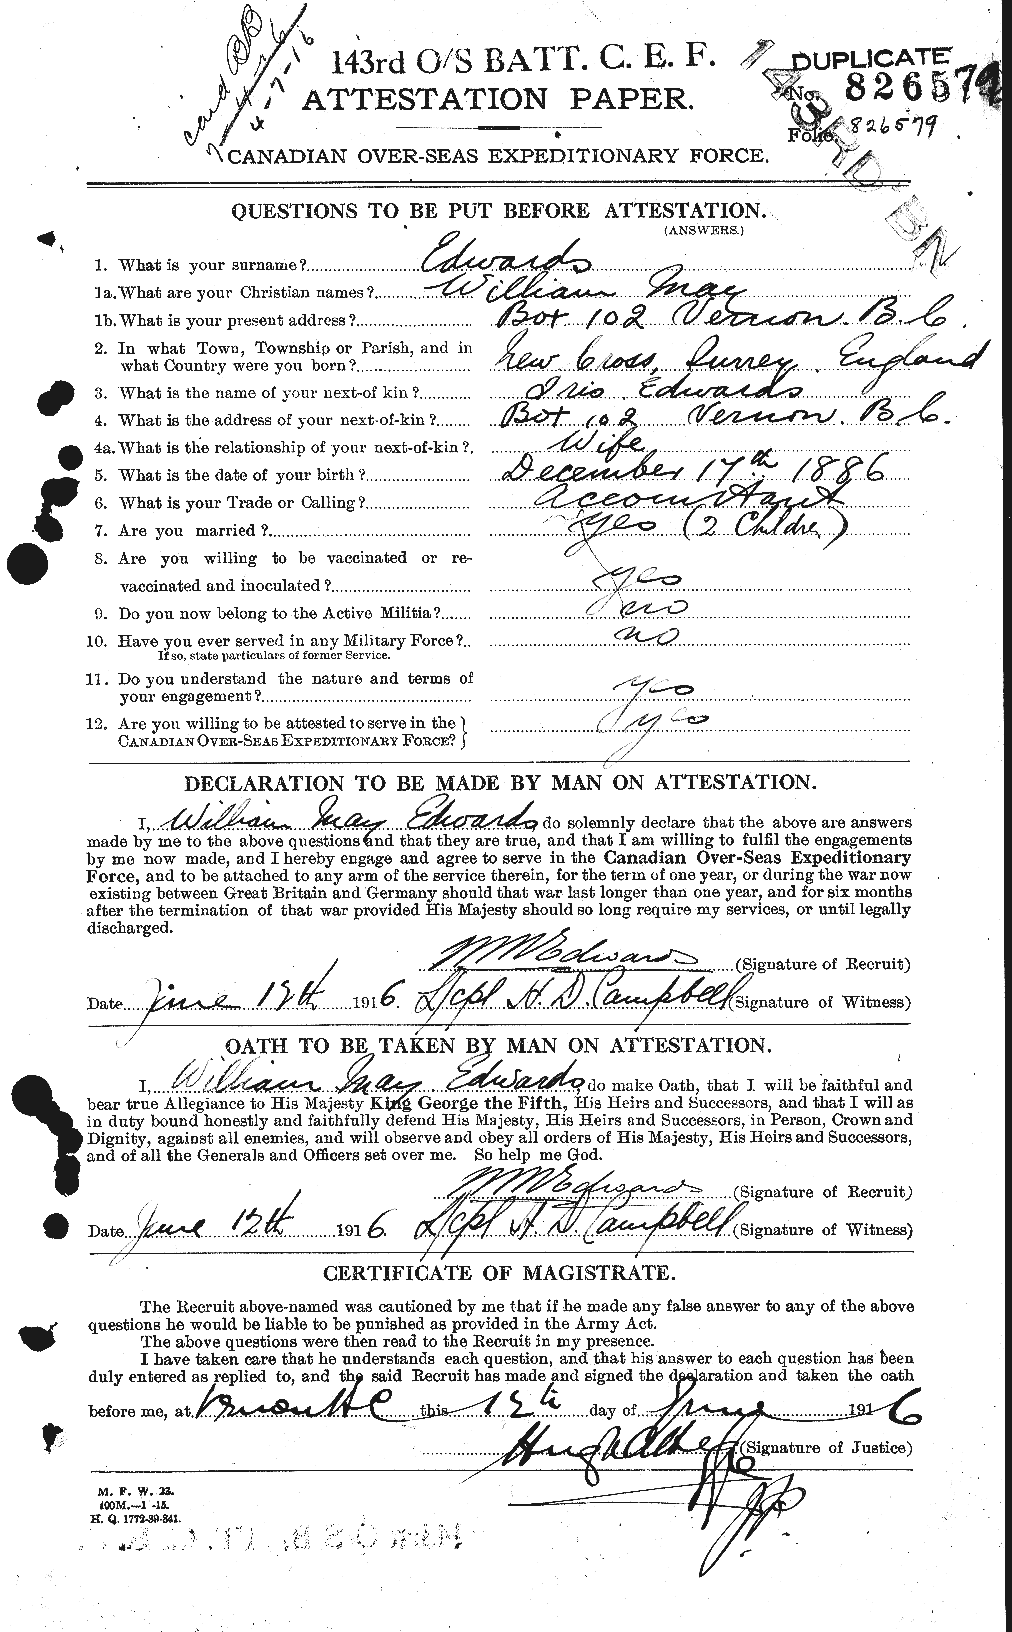 Personnel Records of the First World War - CEF 311932a